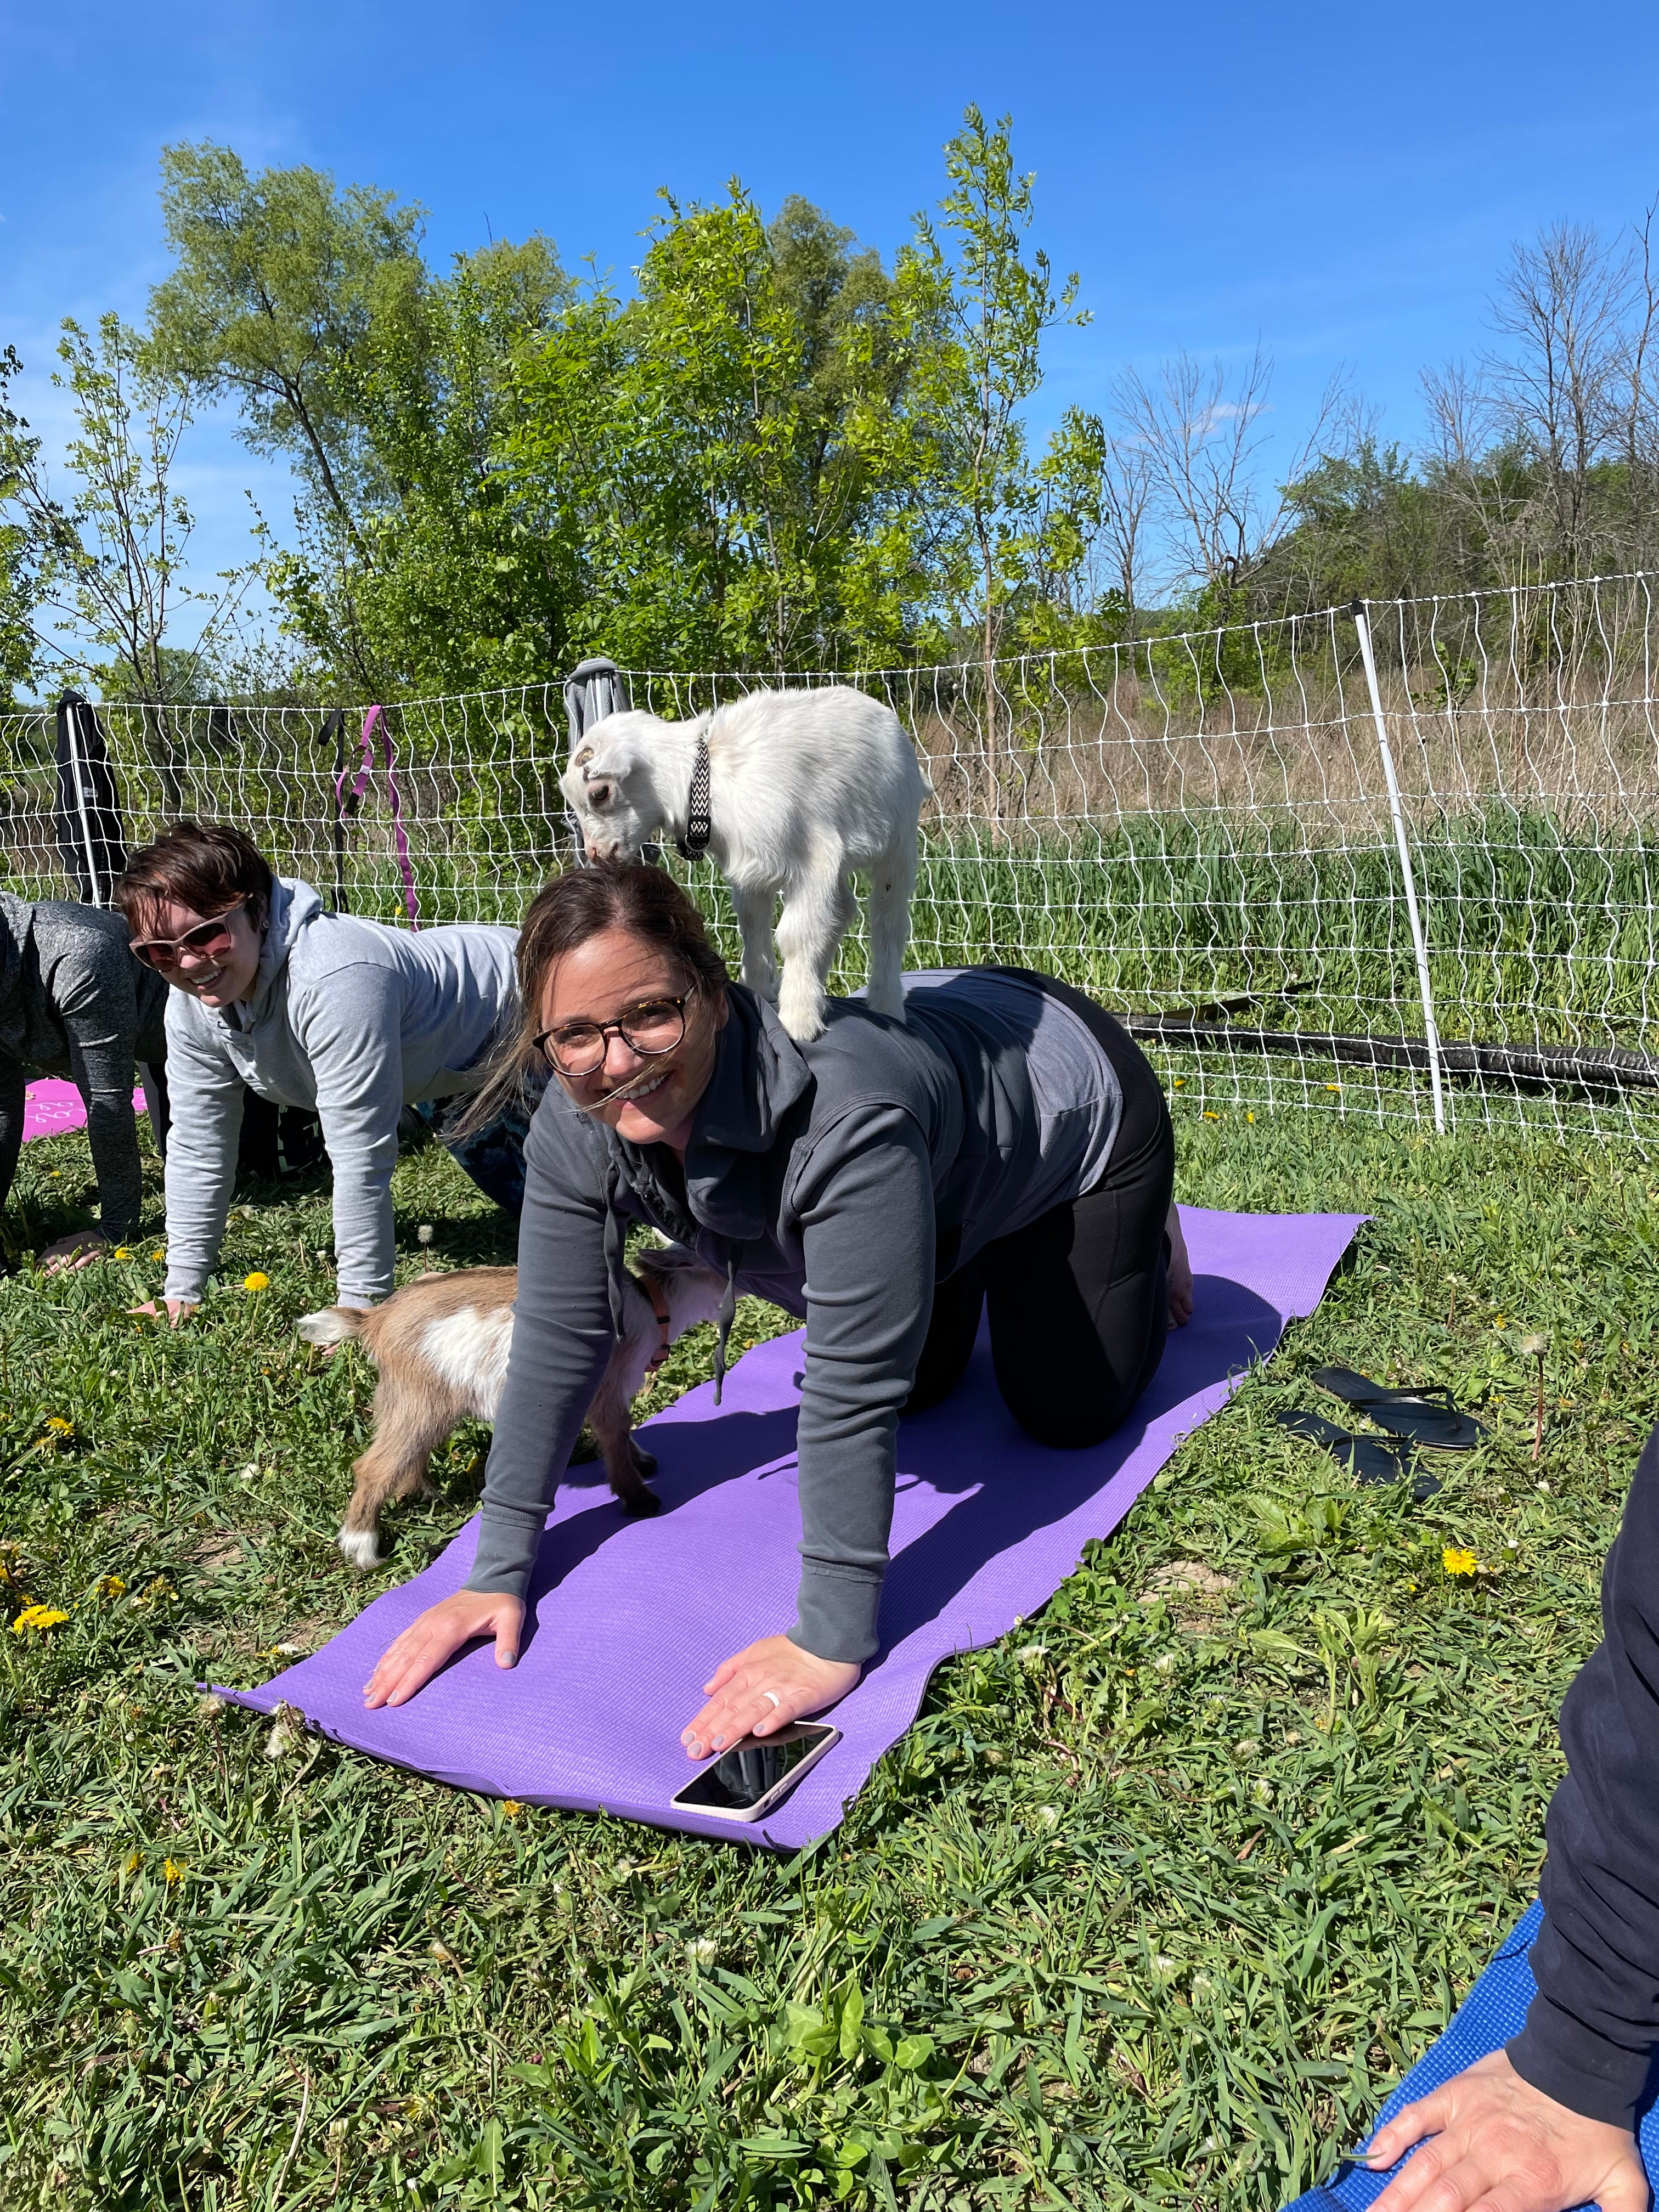 Goat Yoga participant with baby goat on back